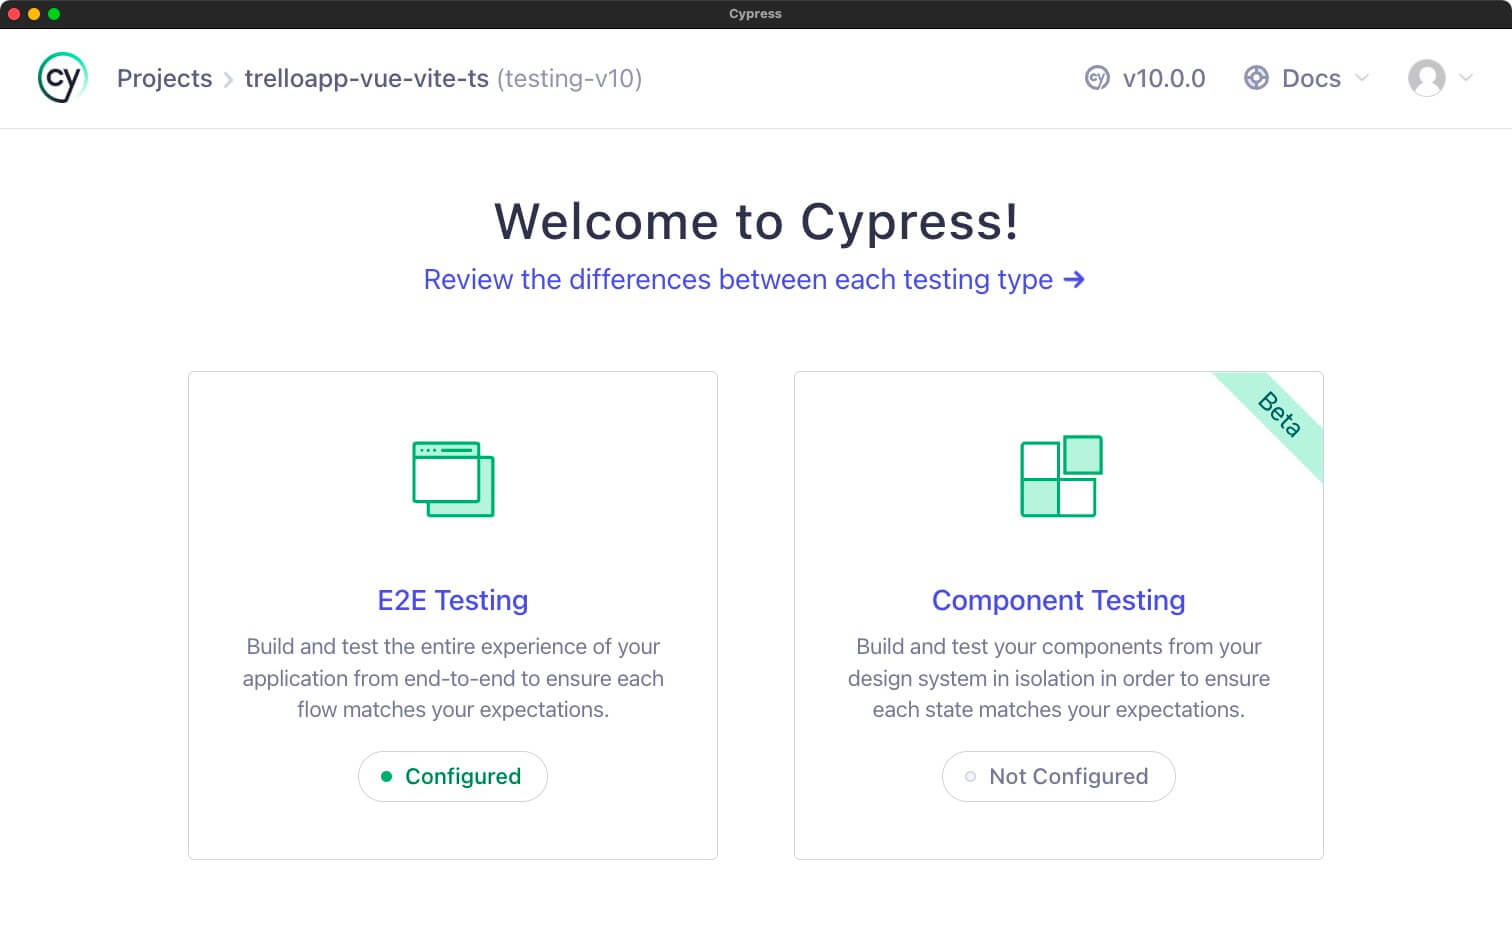 The welcome screen of Cypress with options for E2E and Component Testing.